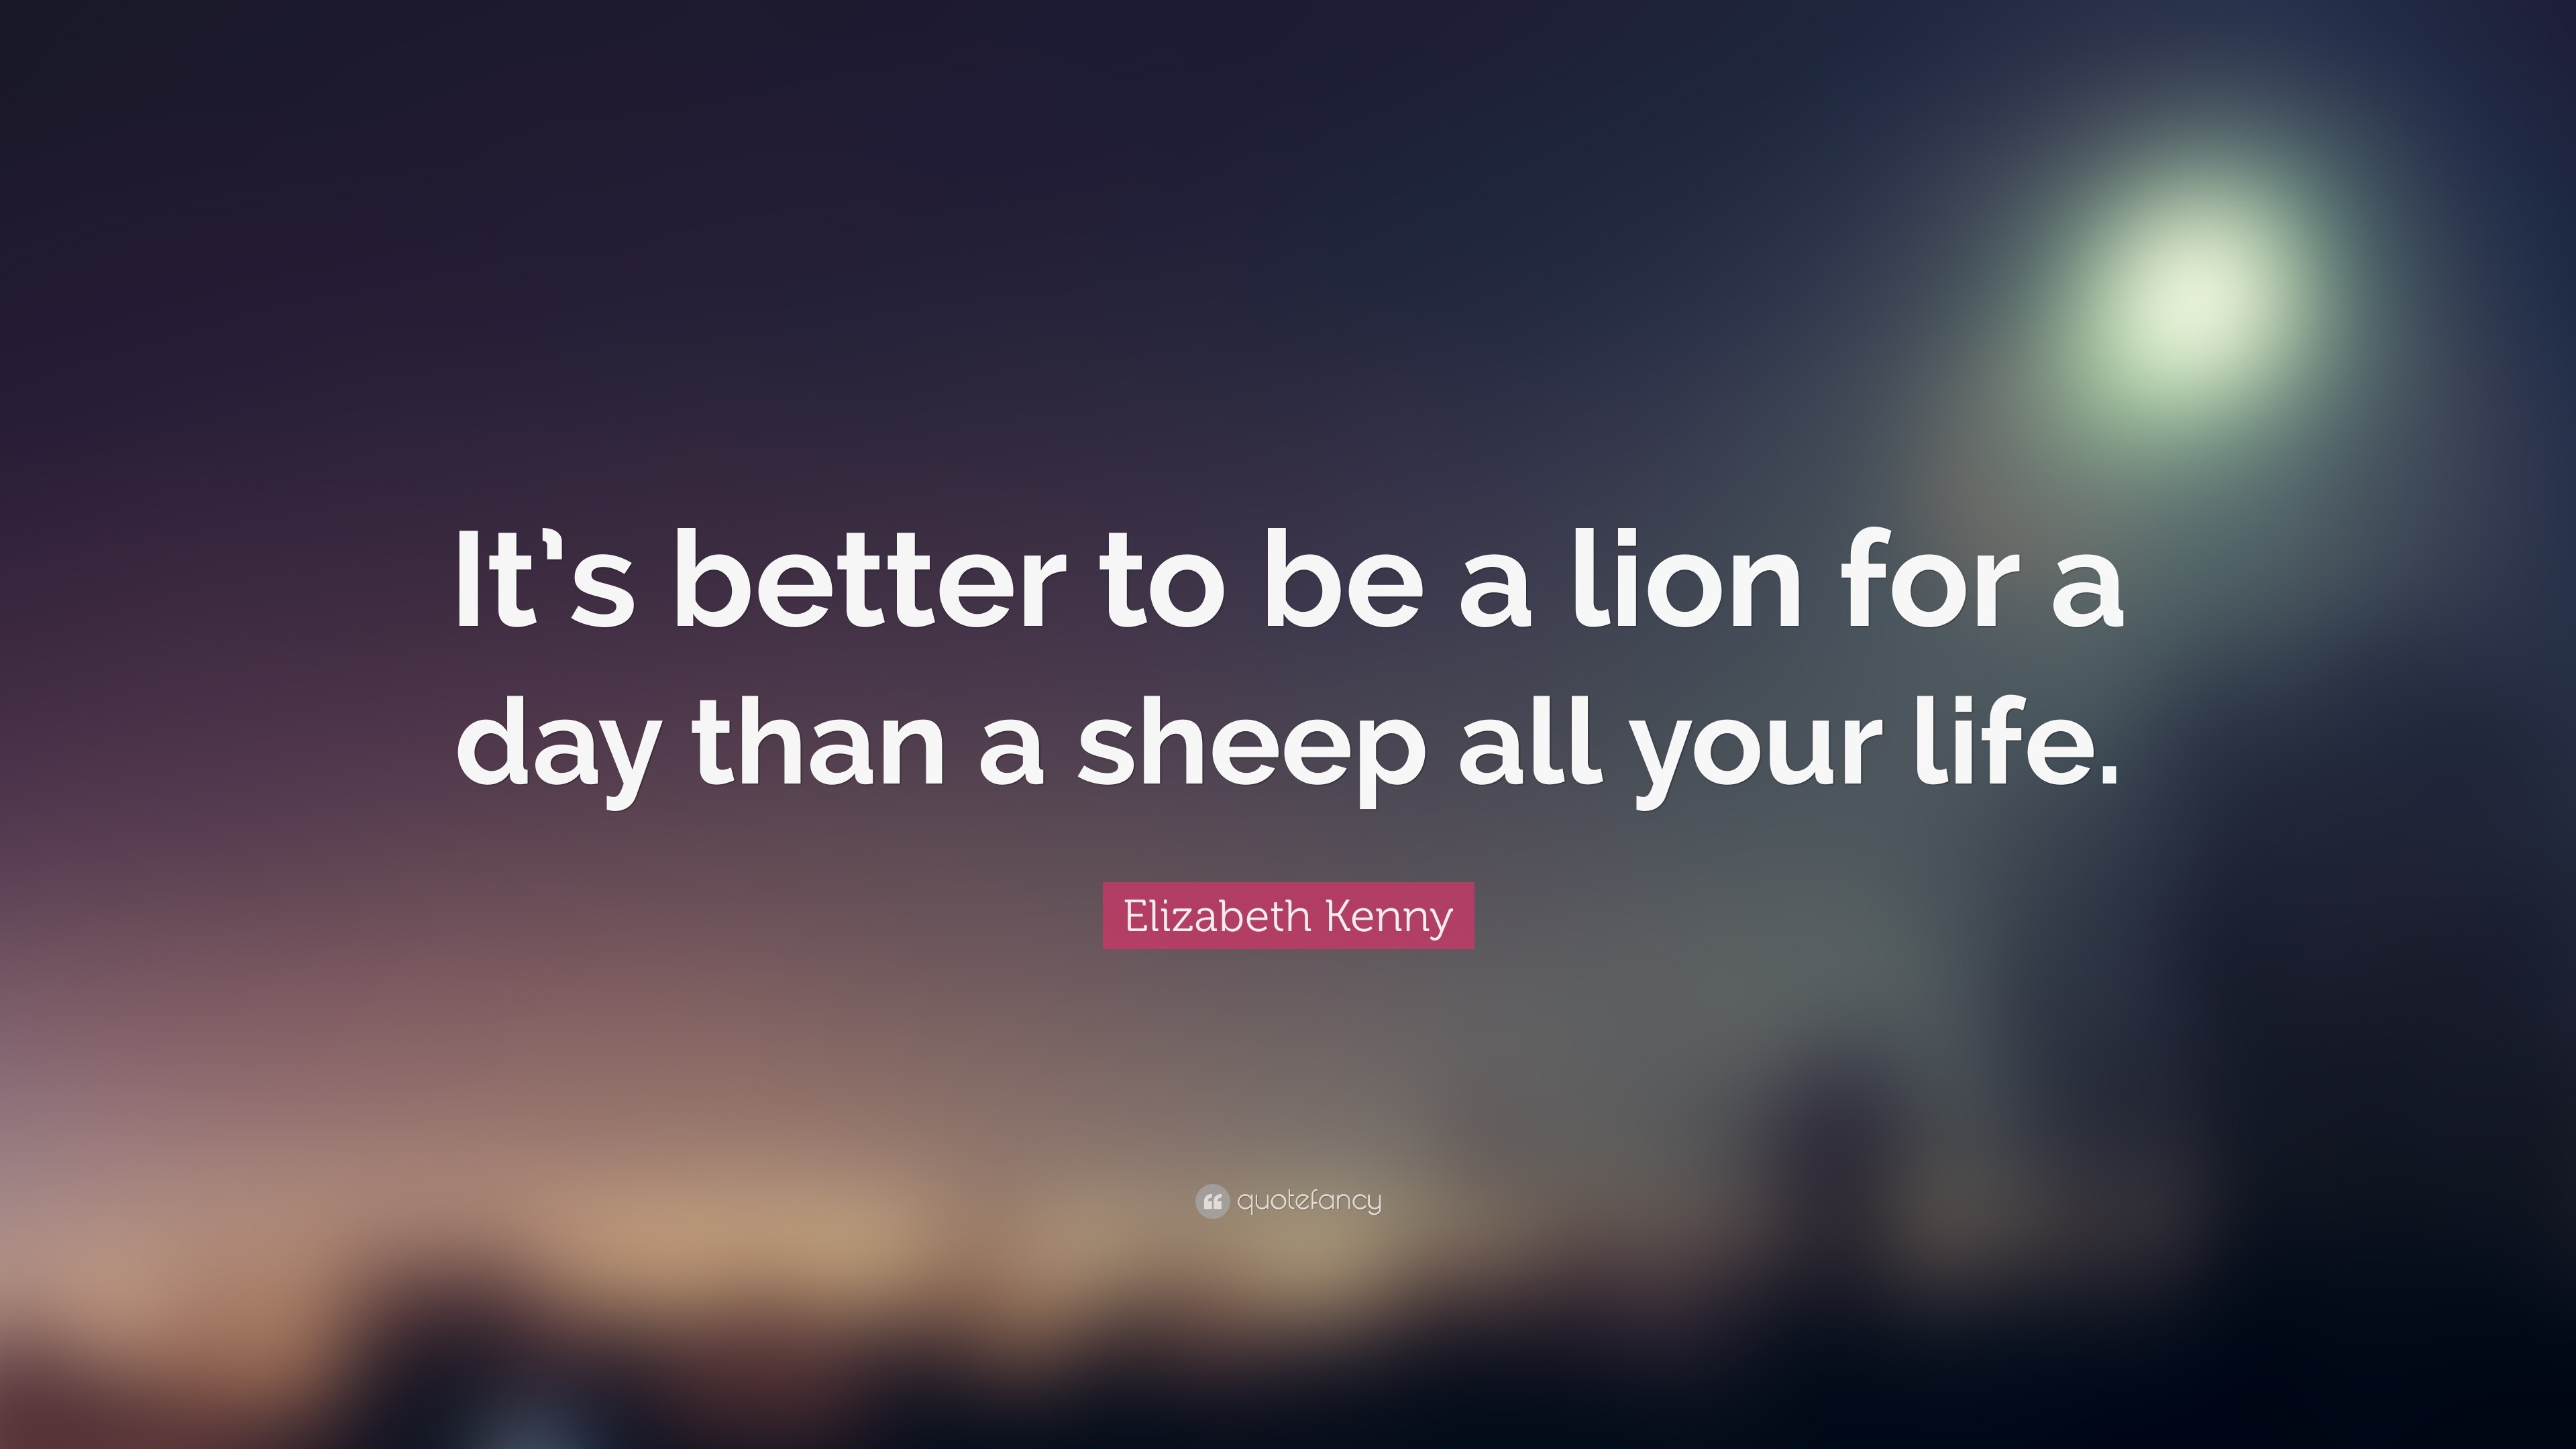 31012 Elizabeth Kenny Quote It s better to be a lion for a day than a